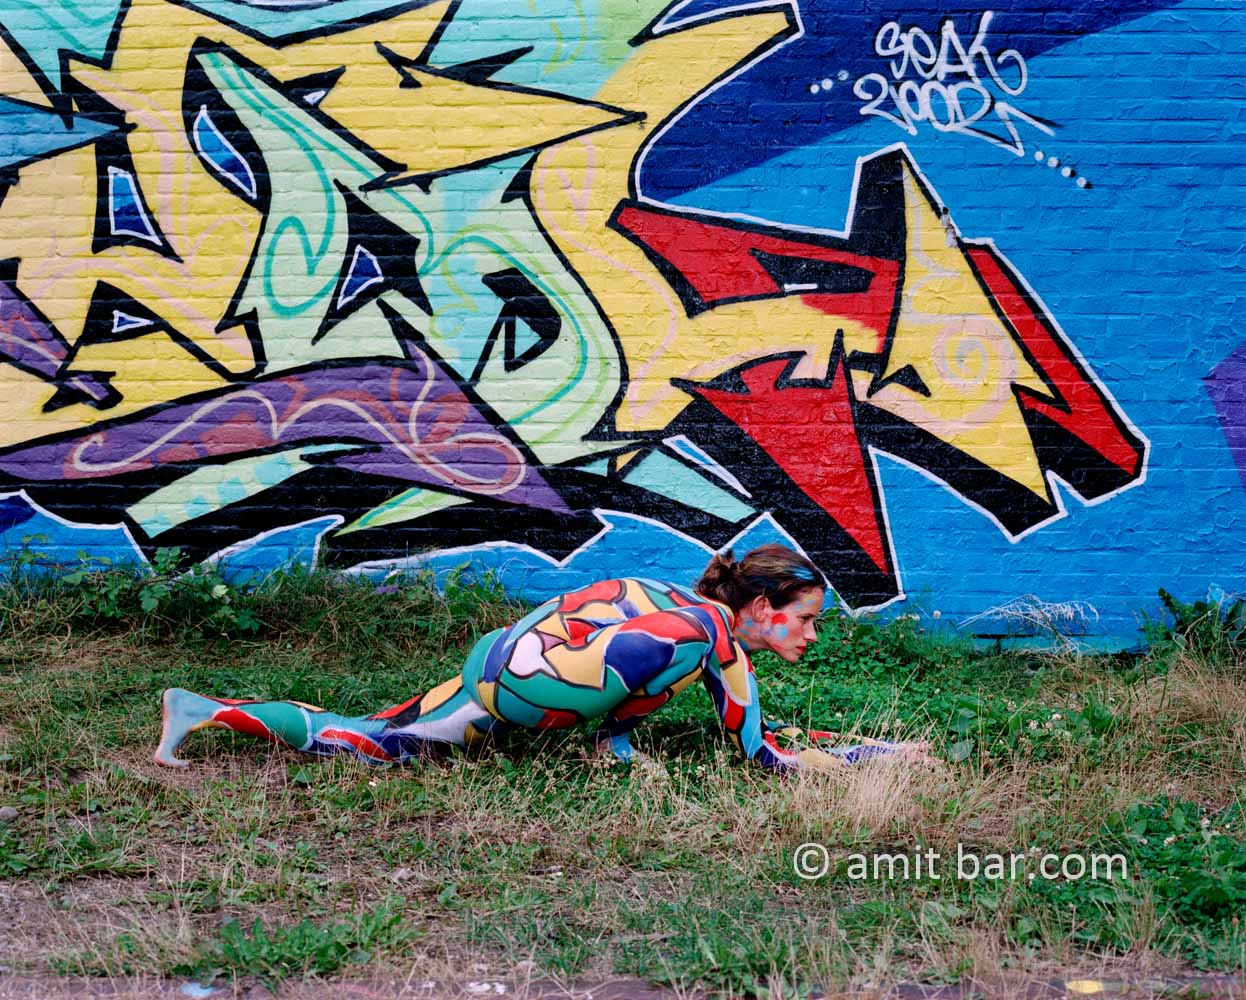 Graffity attack I: Body-painted model with graffity-wall